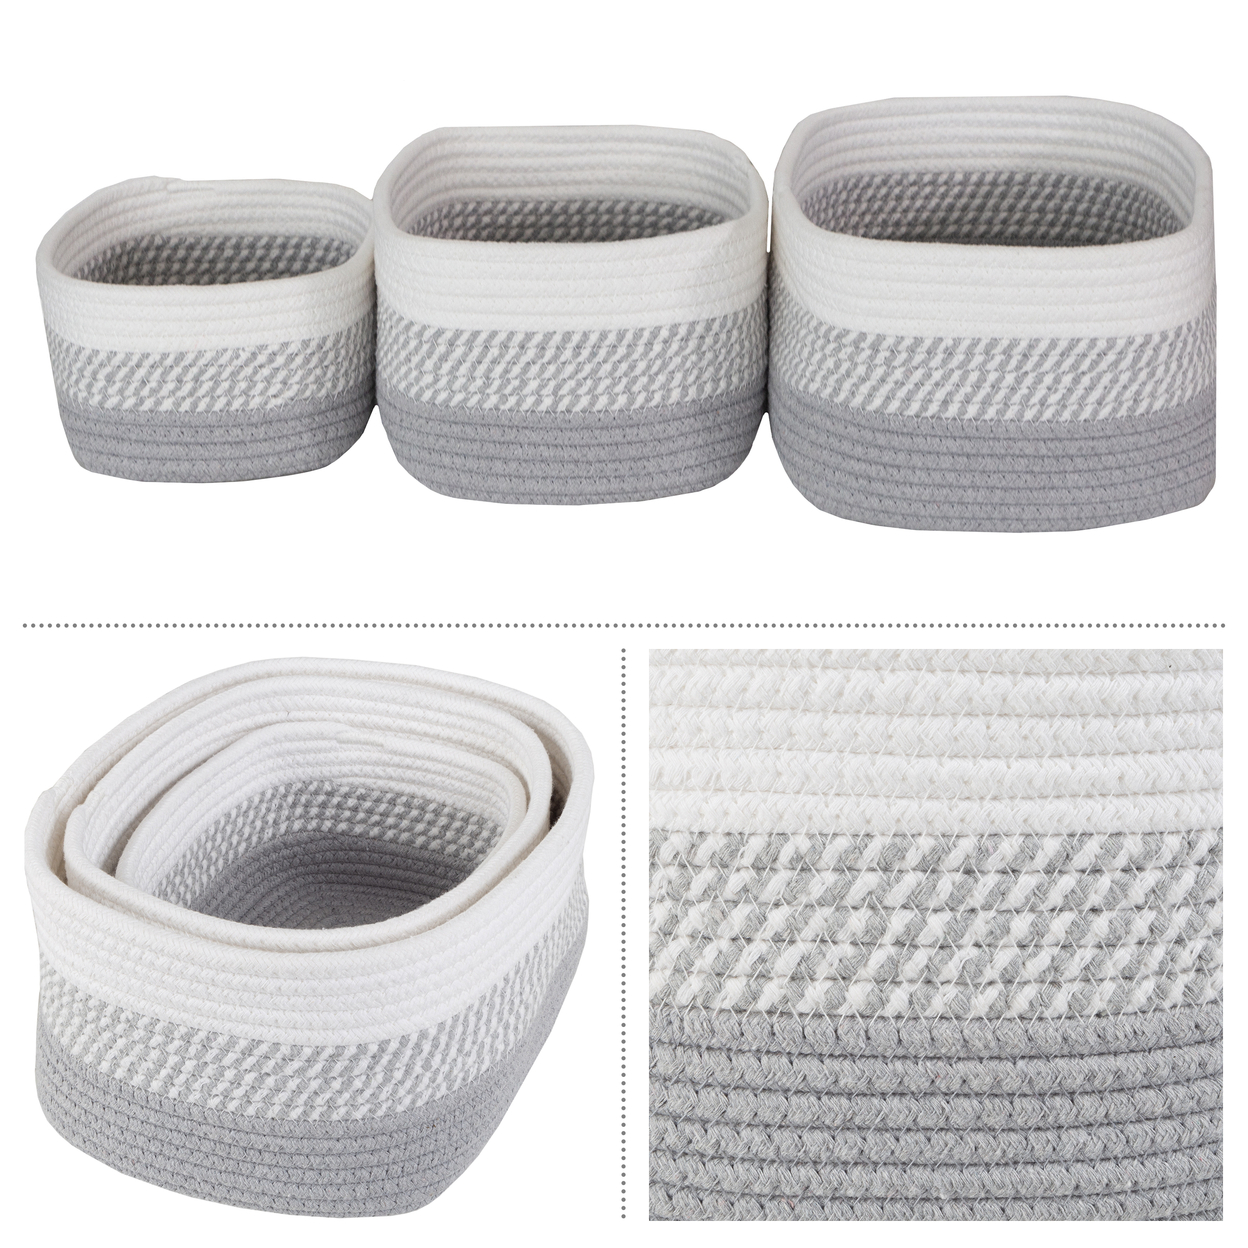 3-Piece Storage Basket Set Small Medium Large Rope Baskets For All Rooms, Gray